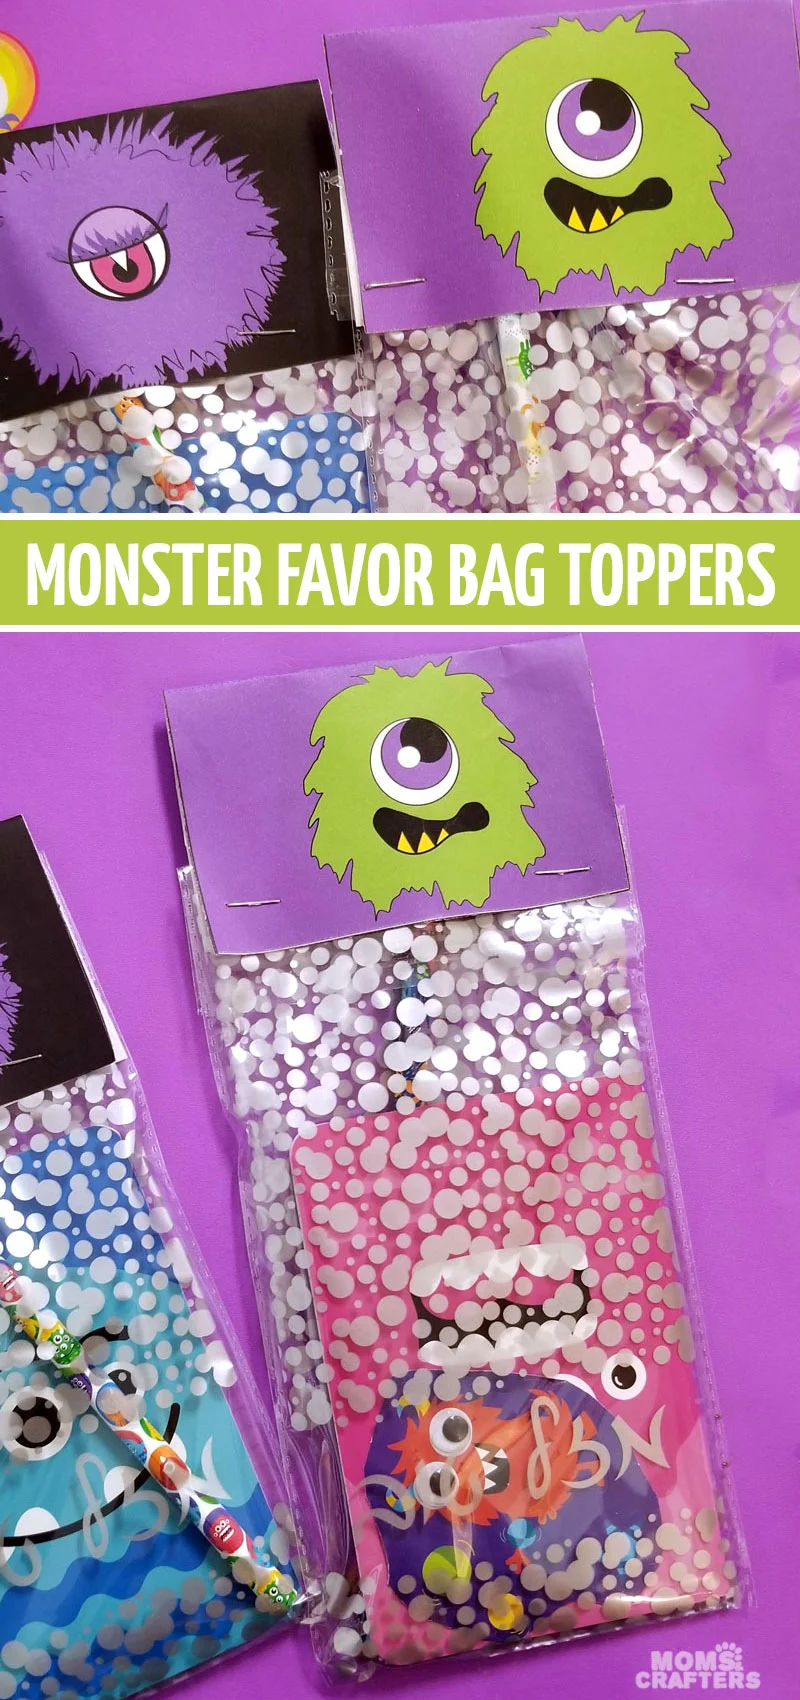 Click to download some monster party favors and bag toppers! This fun monster birthday party idea is so much fun for a third birthday or for a Halloween treat